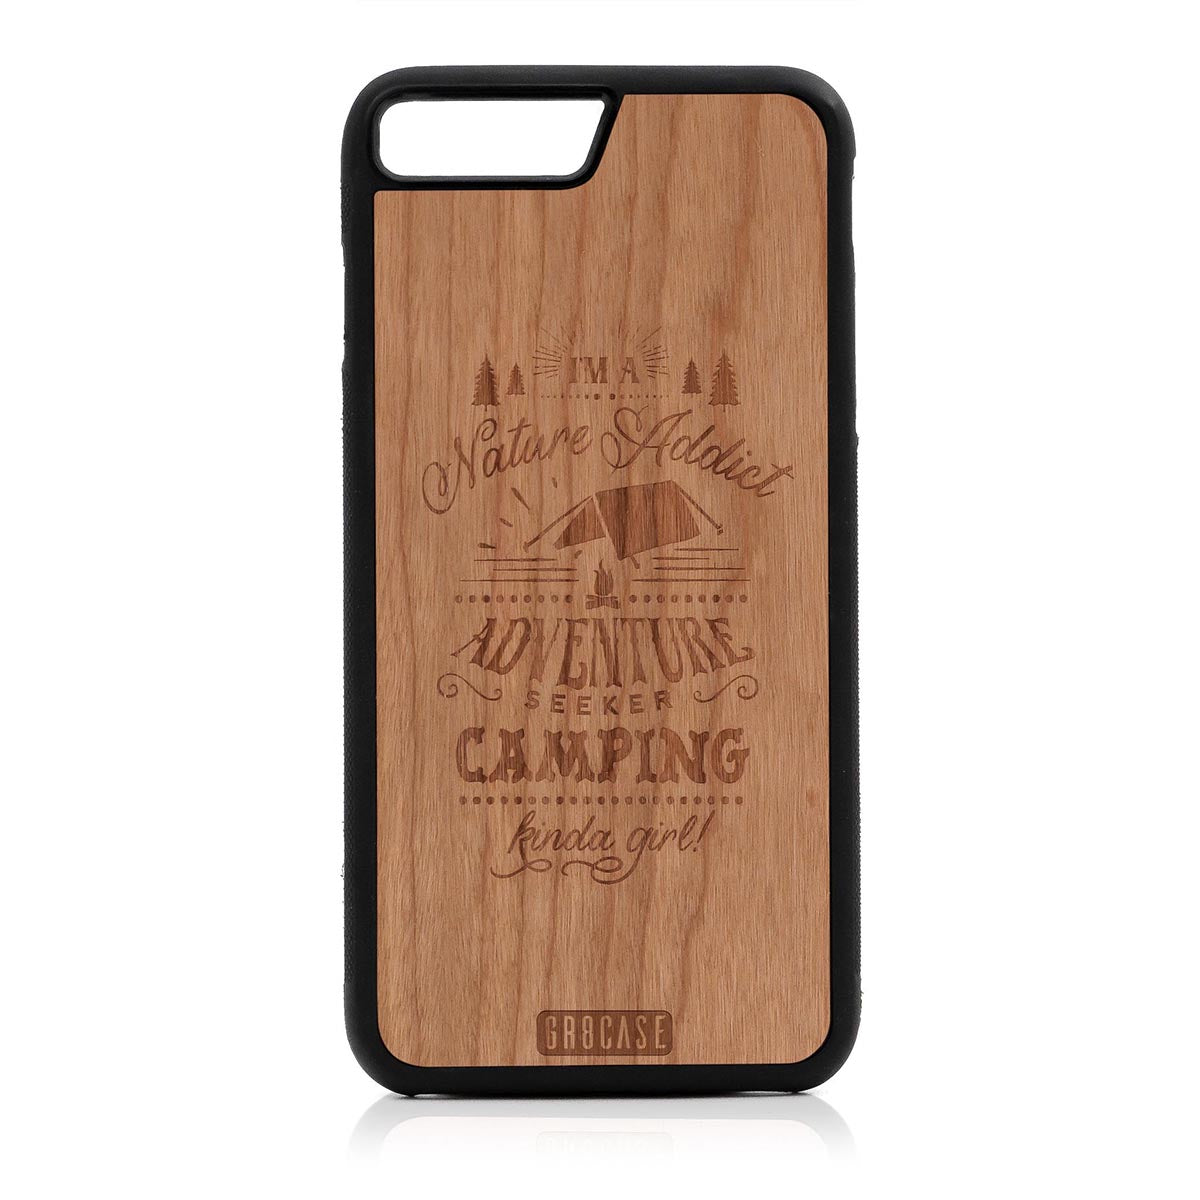 I'm A Nature Addict Adventure Seeker Camping Kinda Girl Design Wood Case For iPhone 7 Plus / 8 Plus by GR8CASE